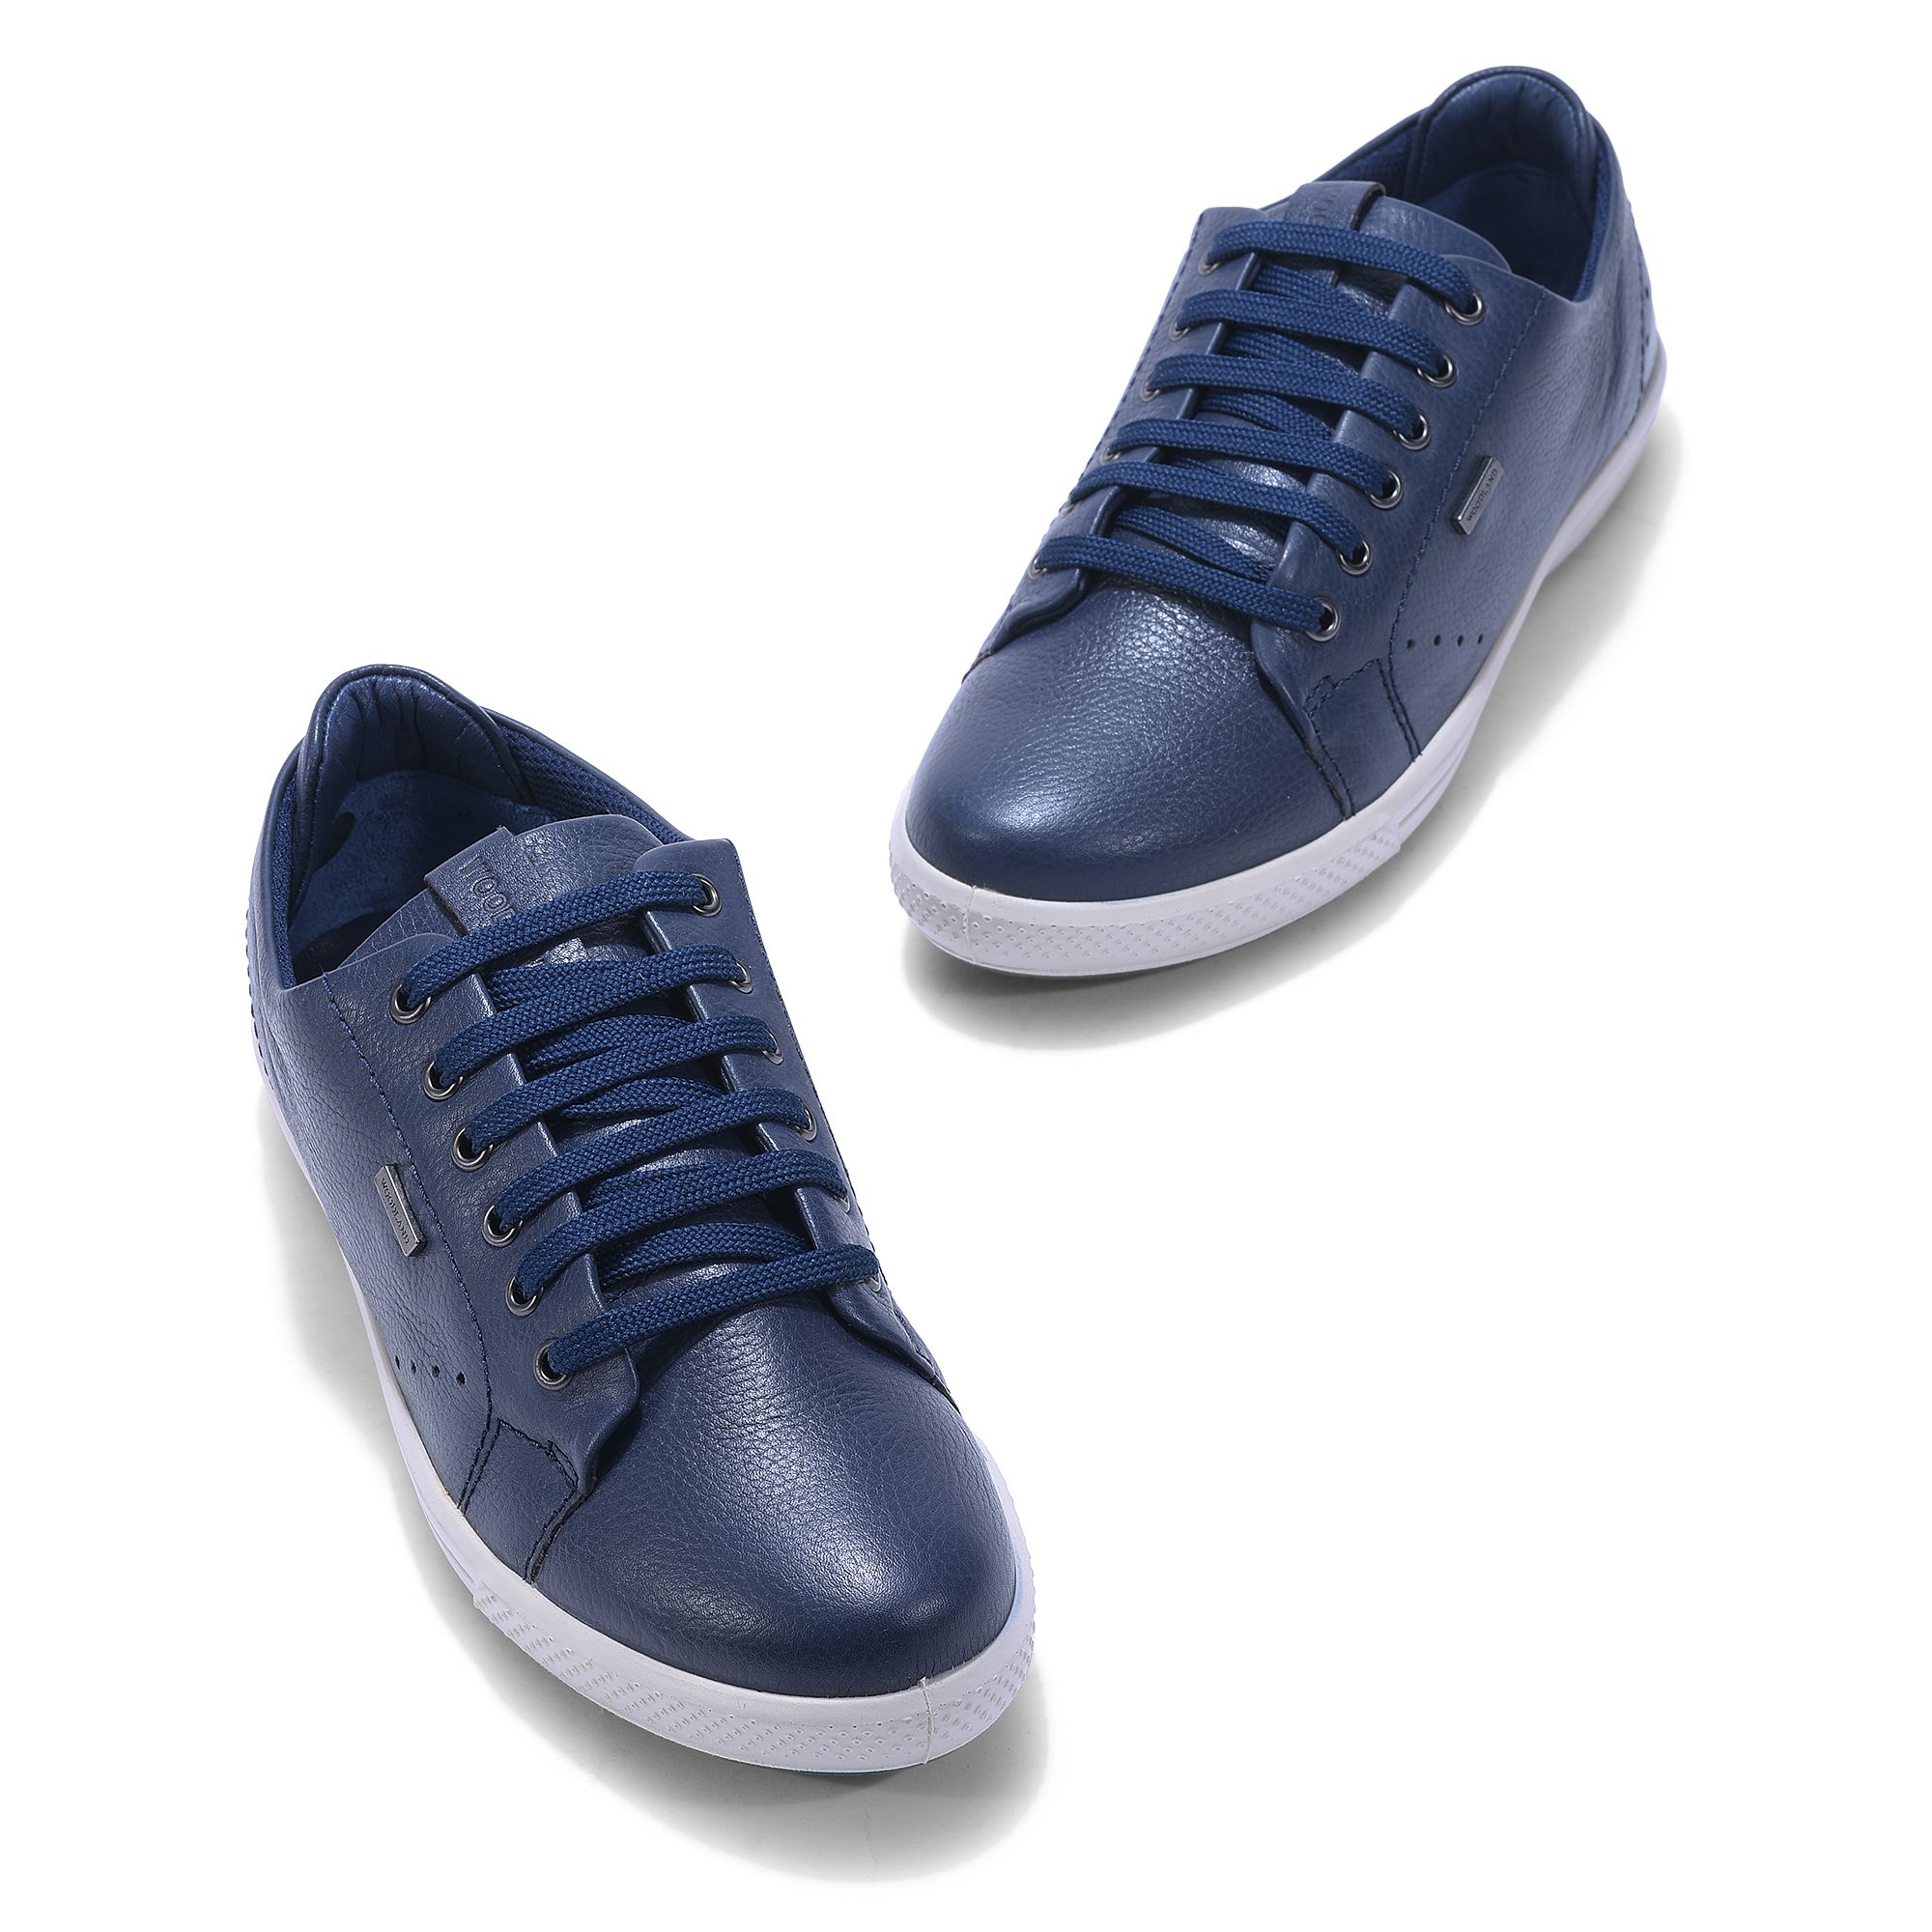 Woodland DBLUE casual sneakers